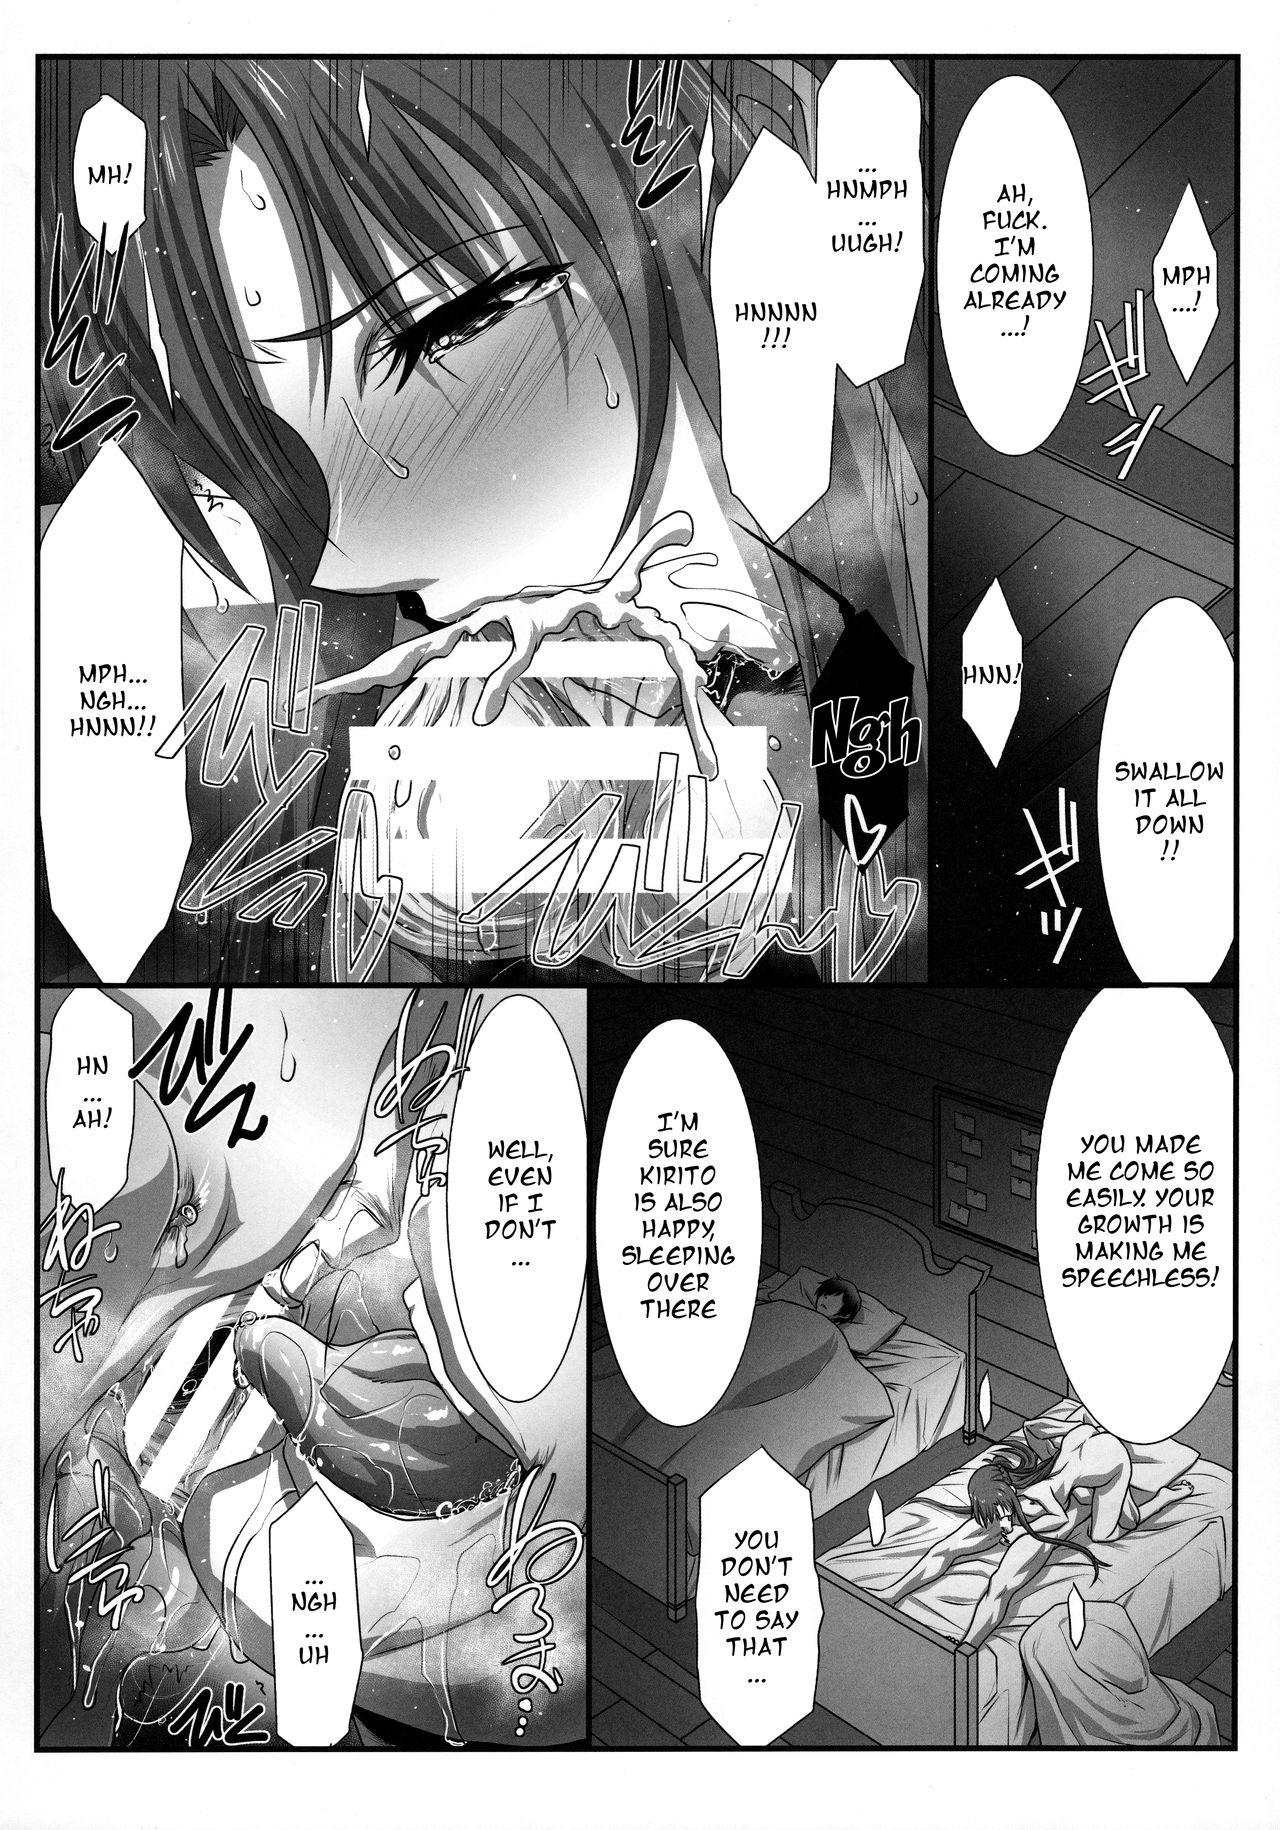 Boy Fuck Girl Astral Bout Ver. 42 - Sword art online Wet Pussy - Page 6